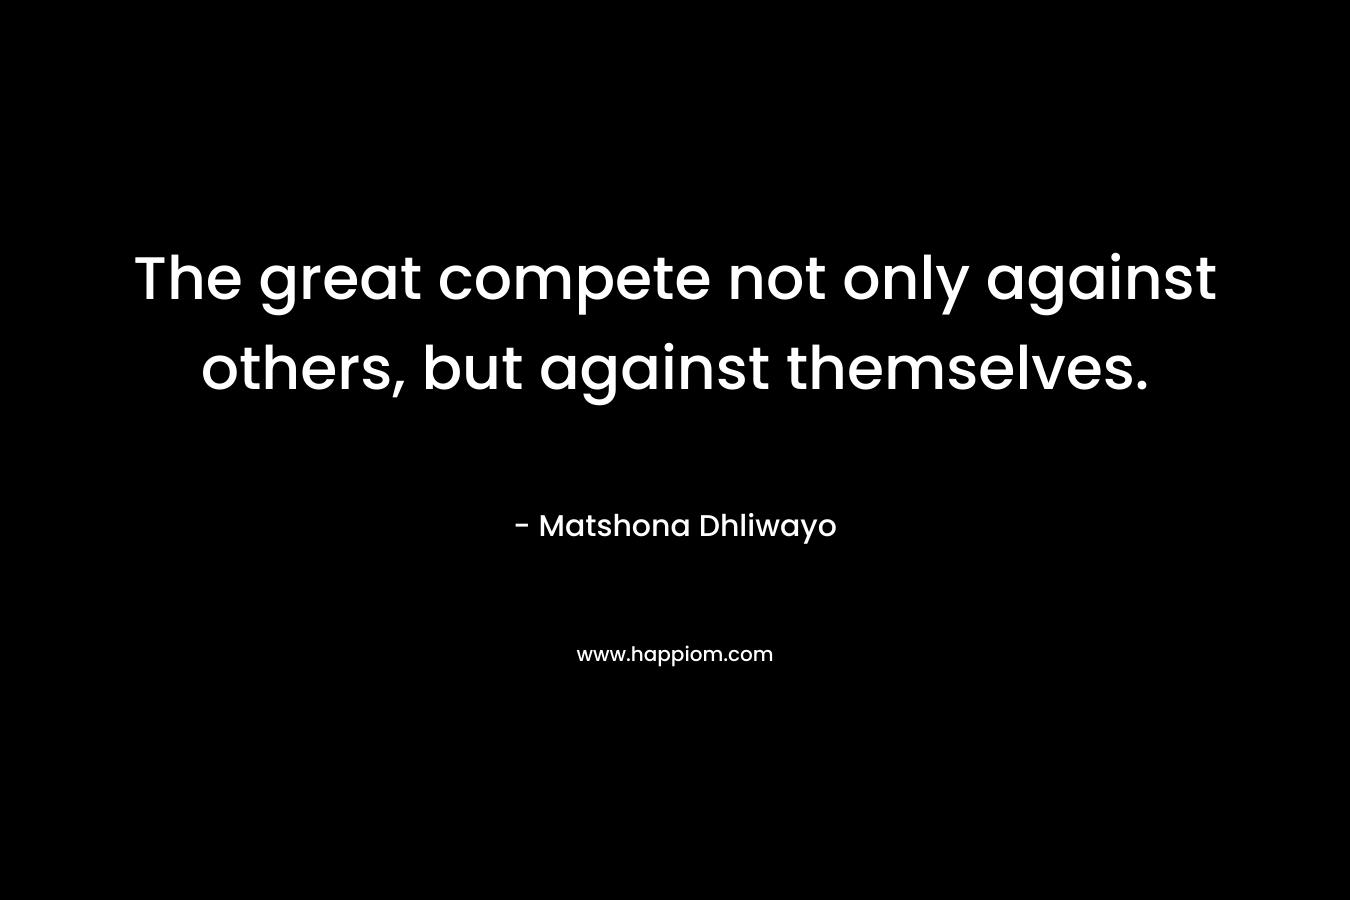 The great compete not only against others, but against themselves.